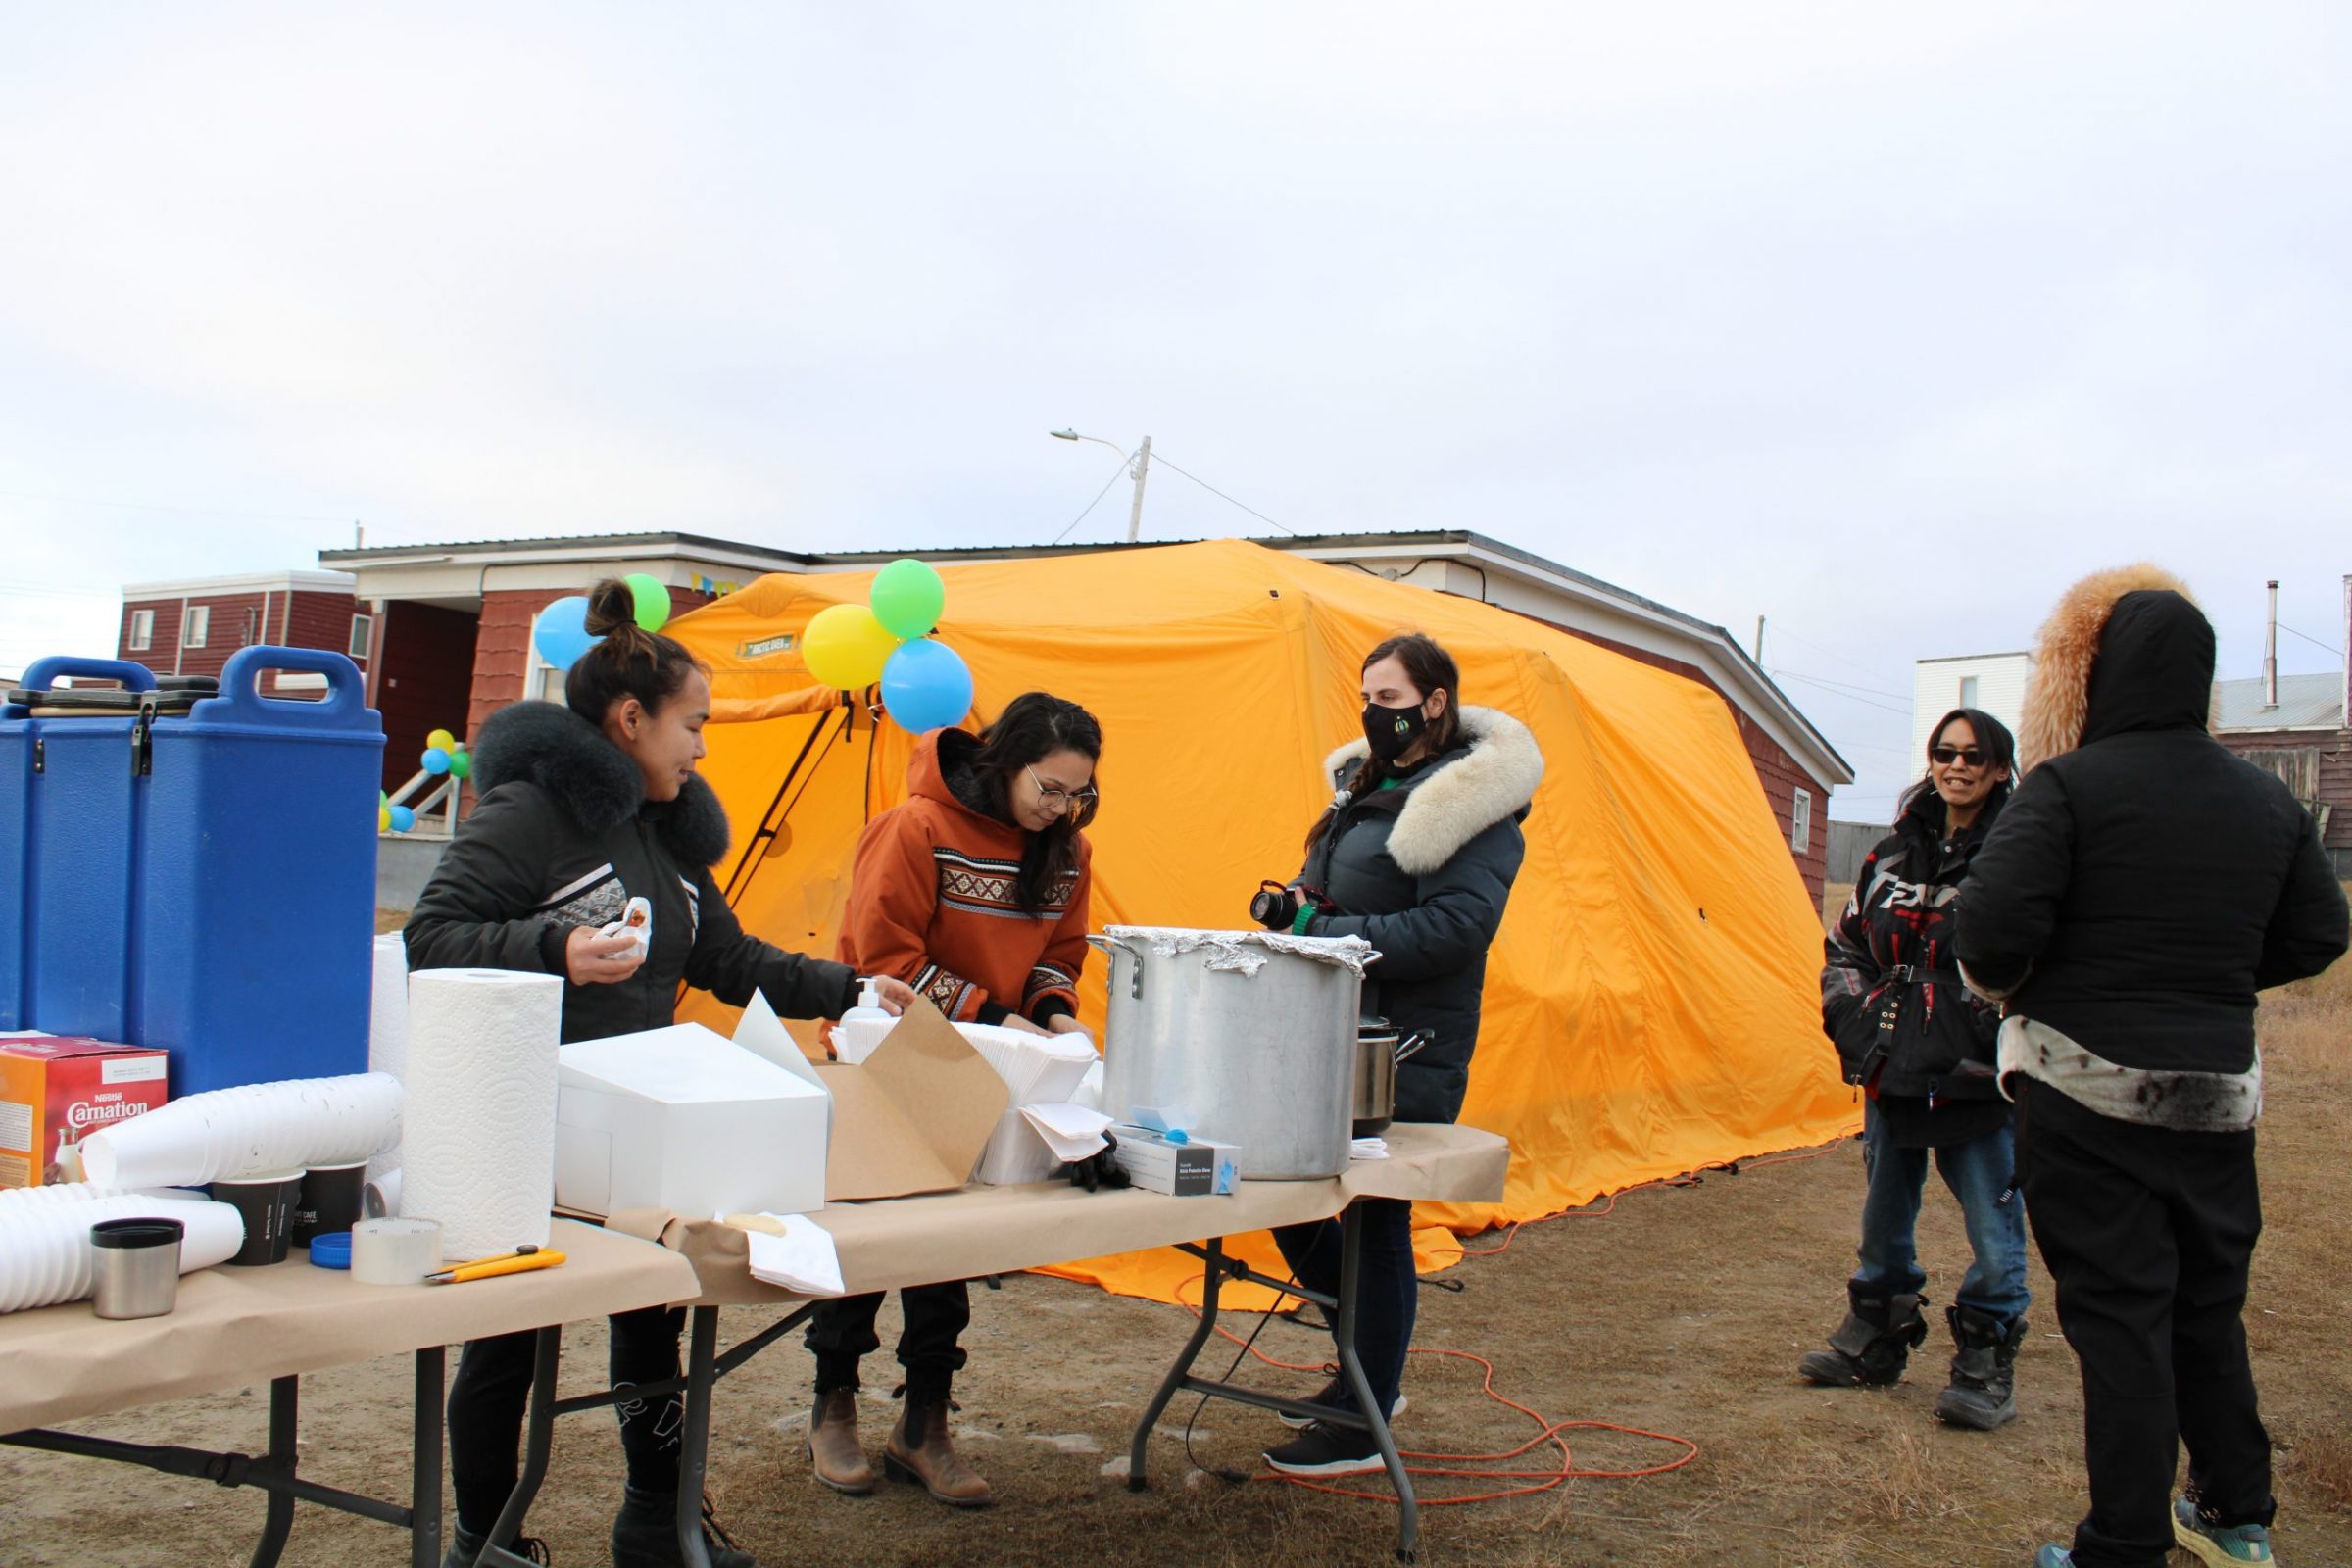 The Qaujigiartiit Health Research Centre celebrates its 15th birthday by serving caribou stew to Iqaluit residents on Tuesday. From left: Nina Kuppaq, Nubiya Enuaraq, Qaujigiartiit’s program evaluator Lauren Nevin and Clayton Sanguya. Attendees also got a look at plans for the proposed Inuusirvik Community Wellness Hub, enter a draw, contribute to a poster about what wellness means to them and take home free backpacks and hats. (Photo by David Venn)